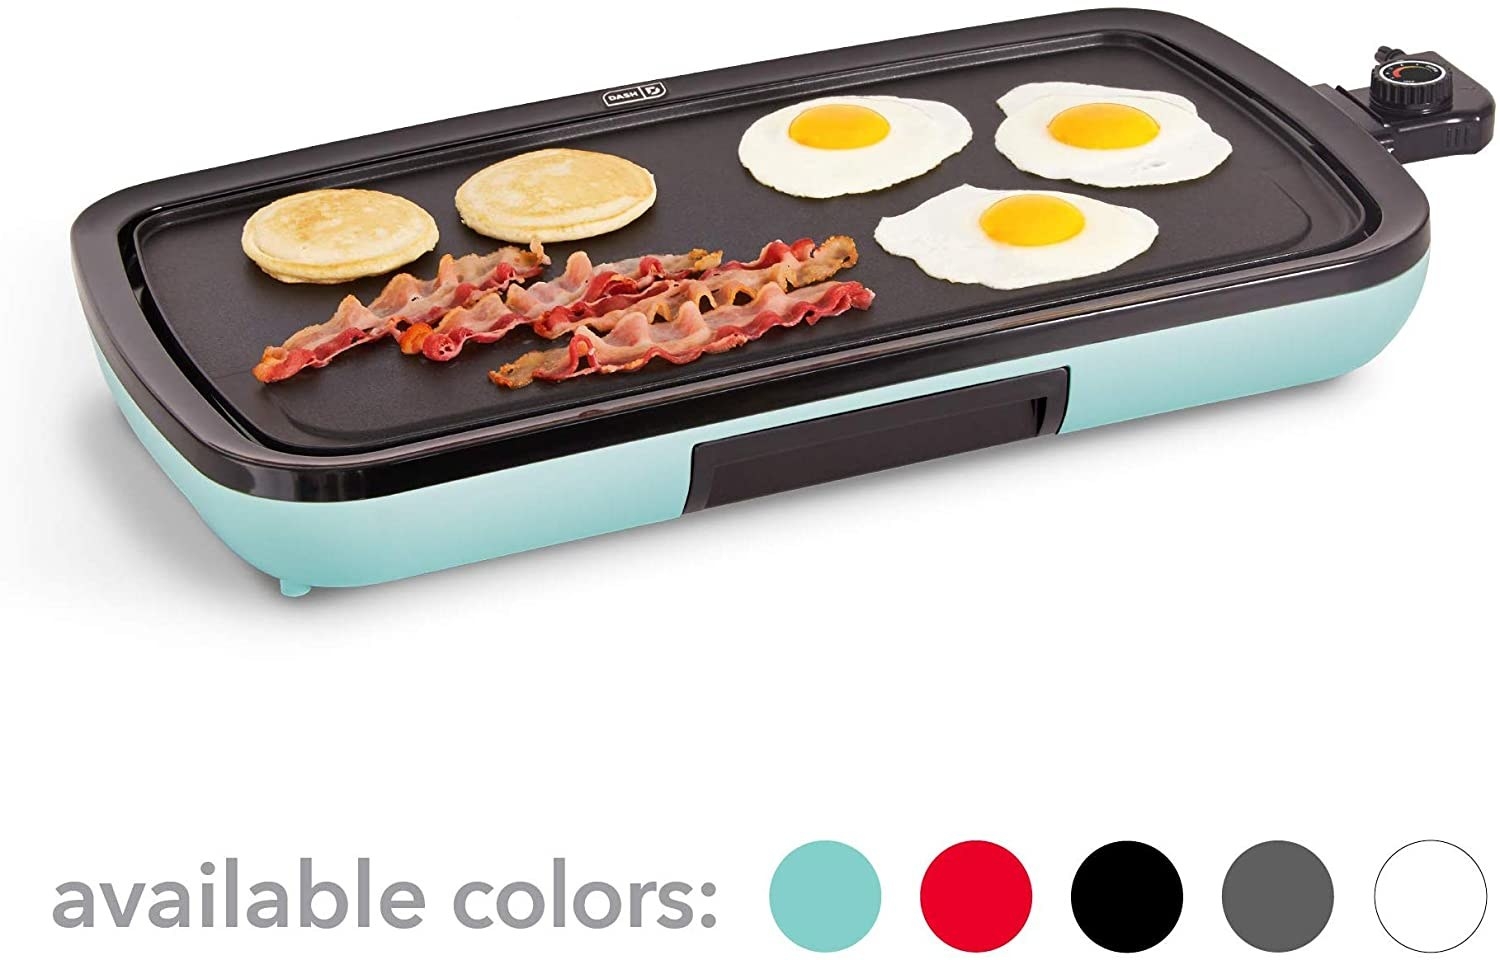 Light Blue Griddle With Bacon, Eggs, and Pancakes on it.